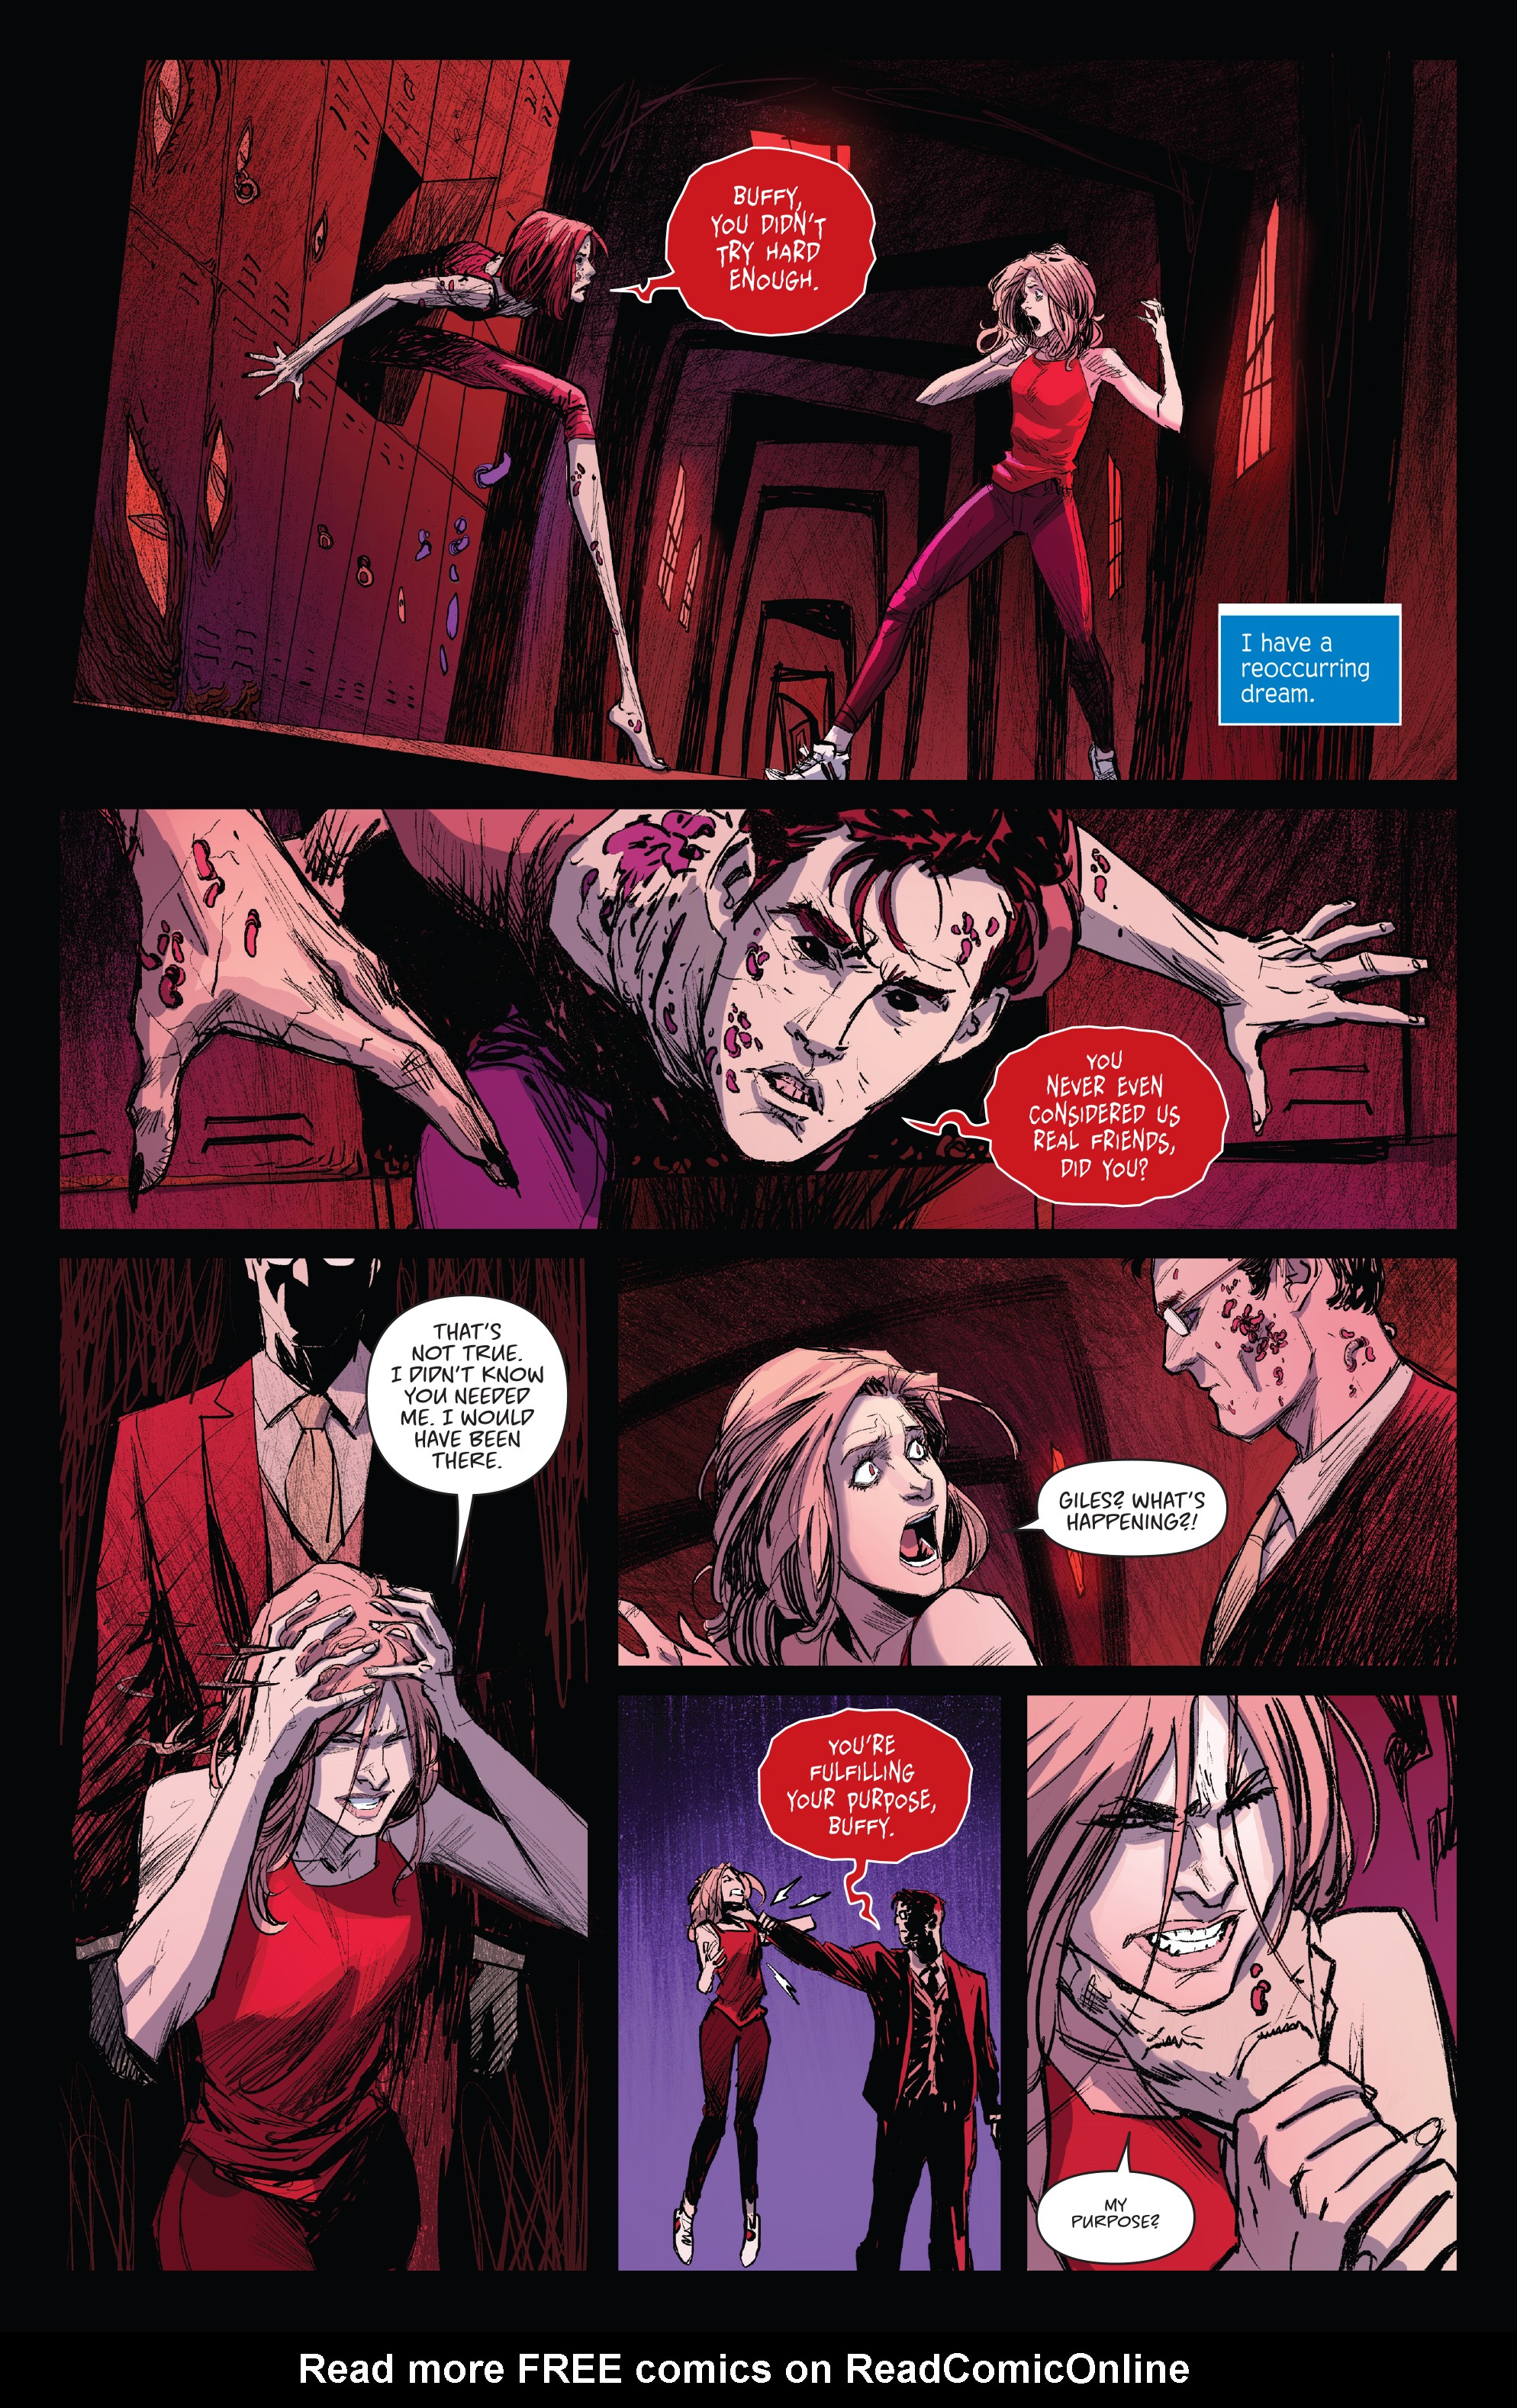 Buffy The Vampire Slayer Issue 2 | Read Buffy The Vampire Slayer Issue 2  comic online in high quality. Read Full Comic online for free - Read comics  online in high quality .| READ COMIC ONLINE